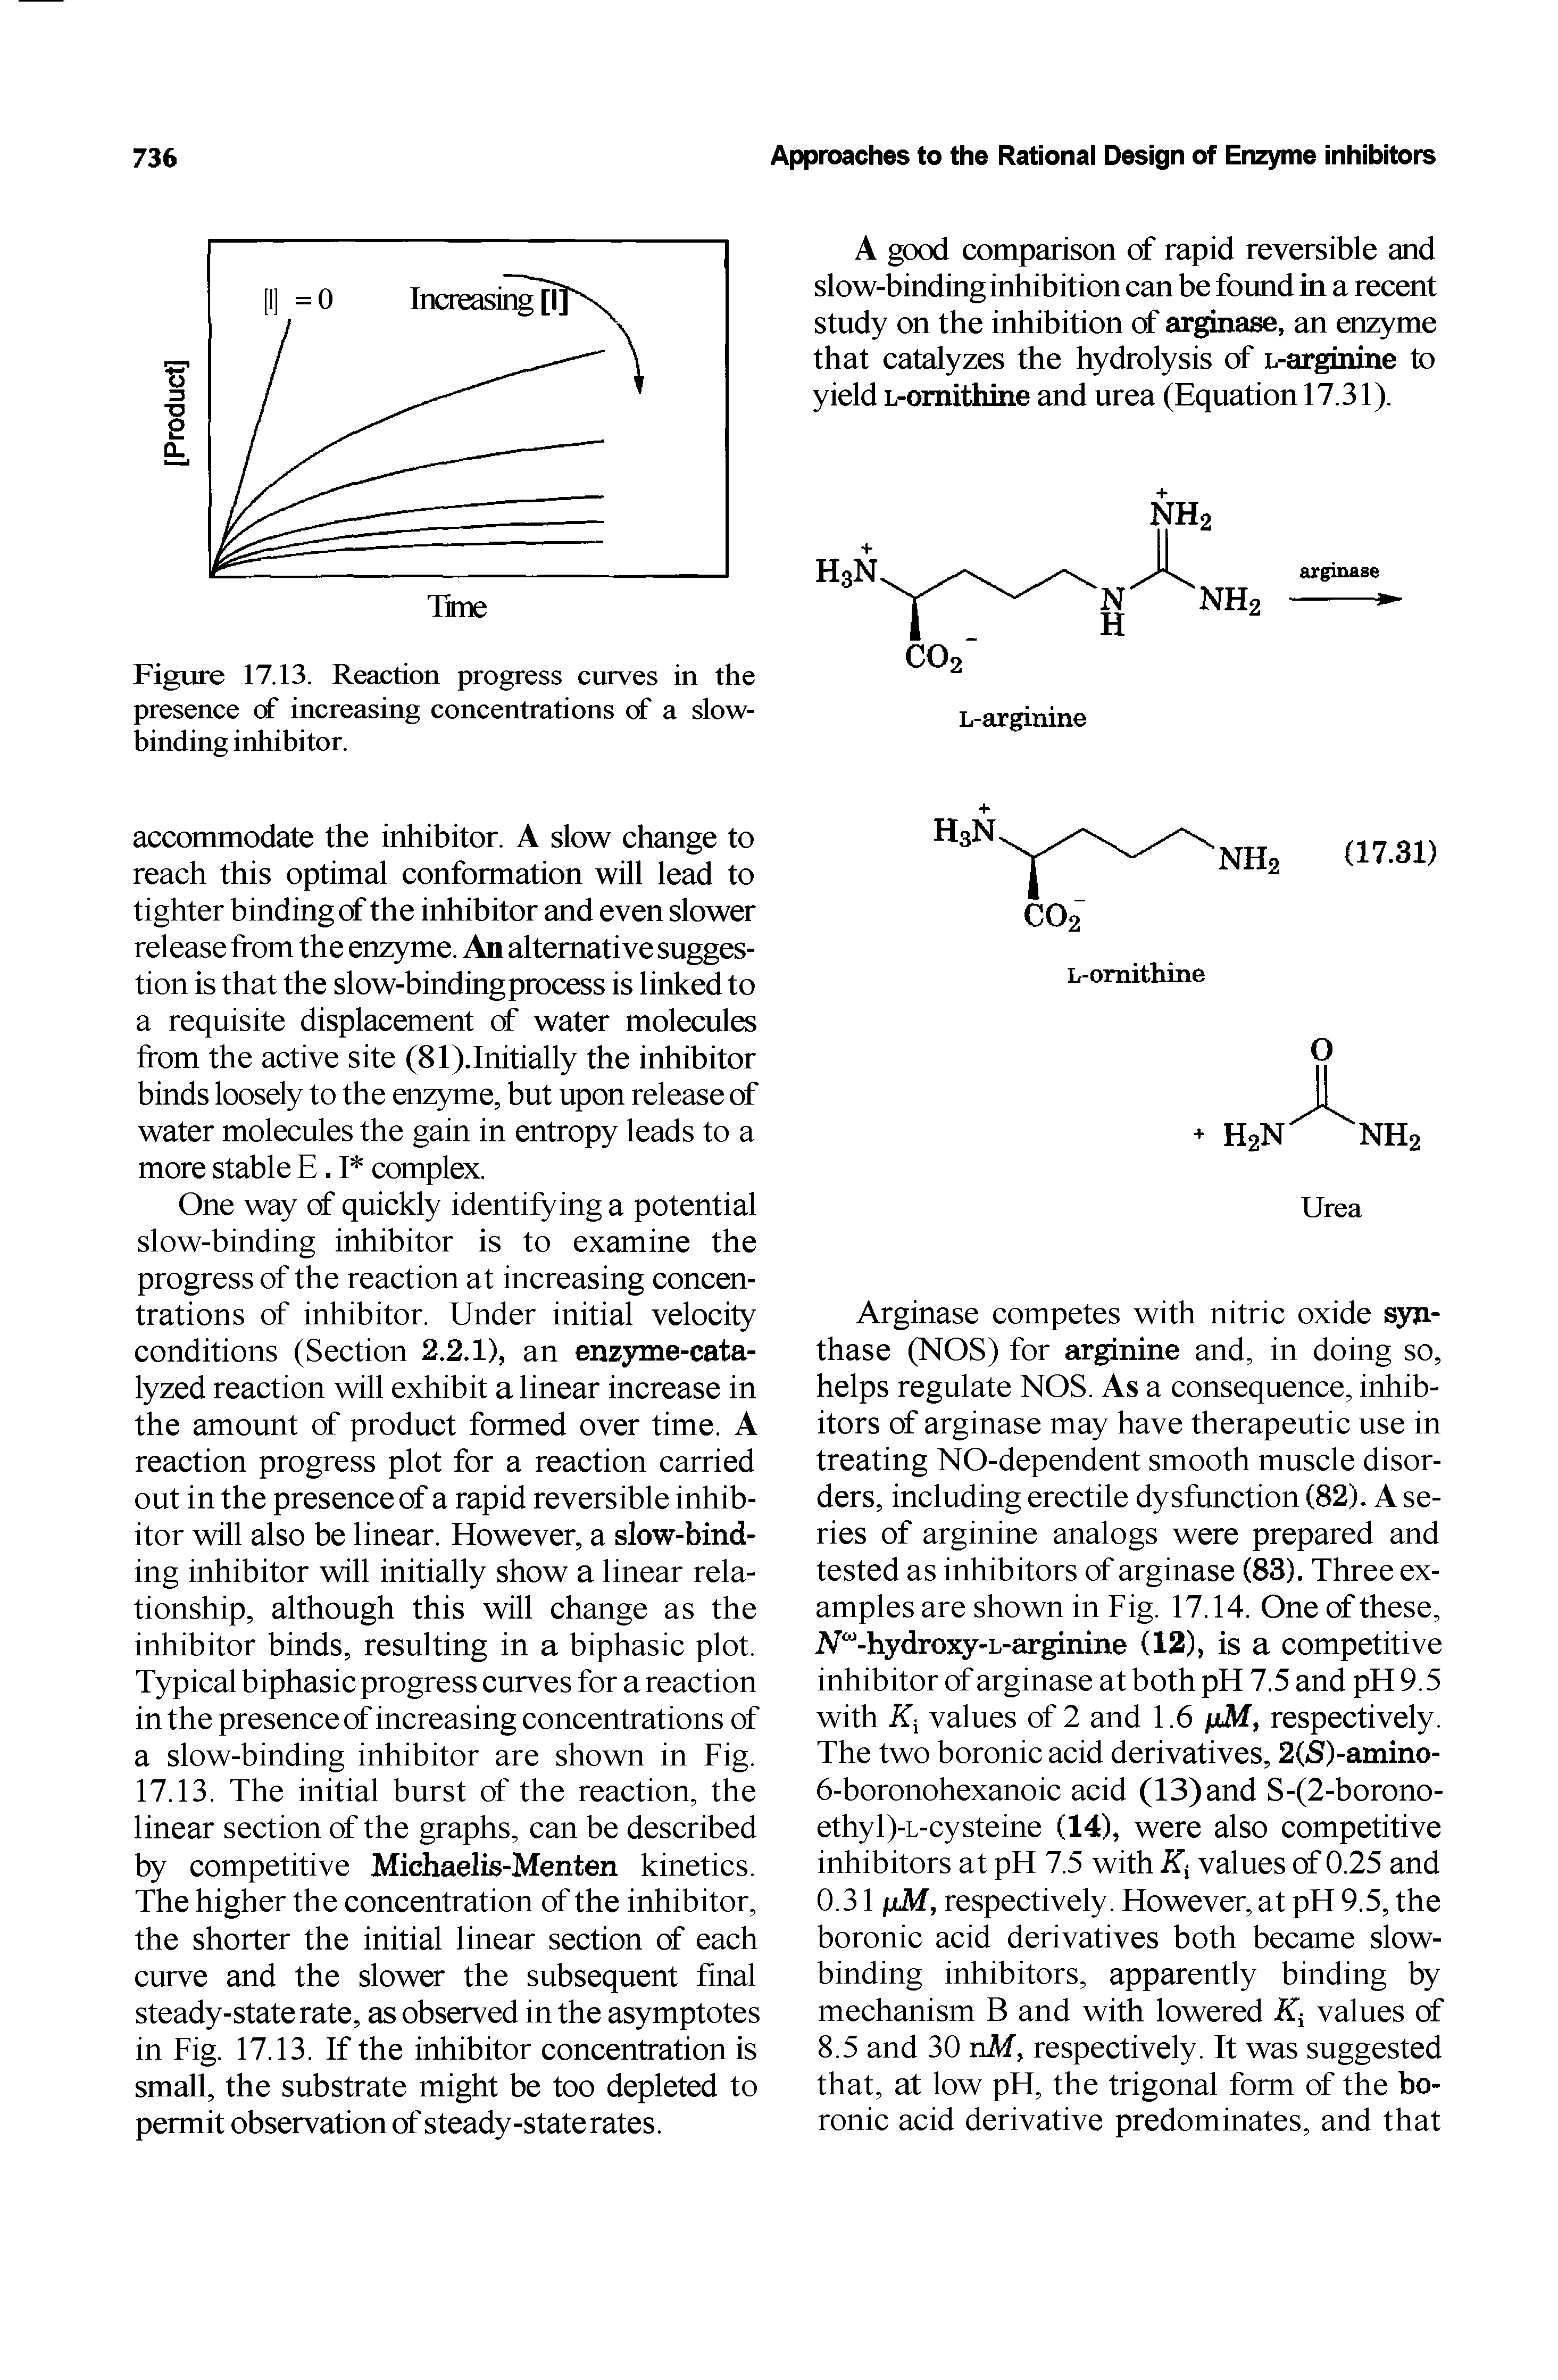 Figure 17.13. Reaction progress curves in the presence of increasing concentrations of a slow-binding inhibitor.